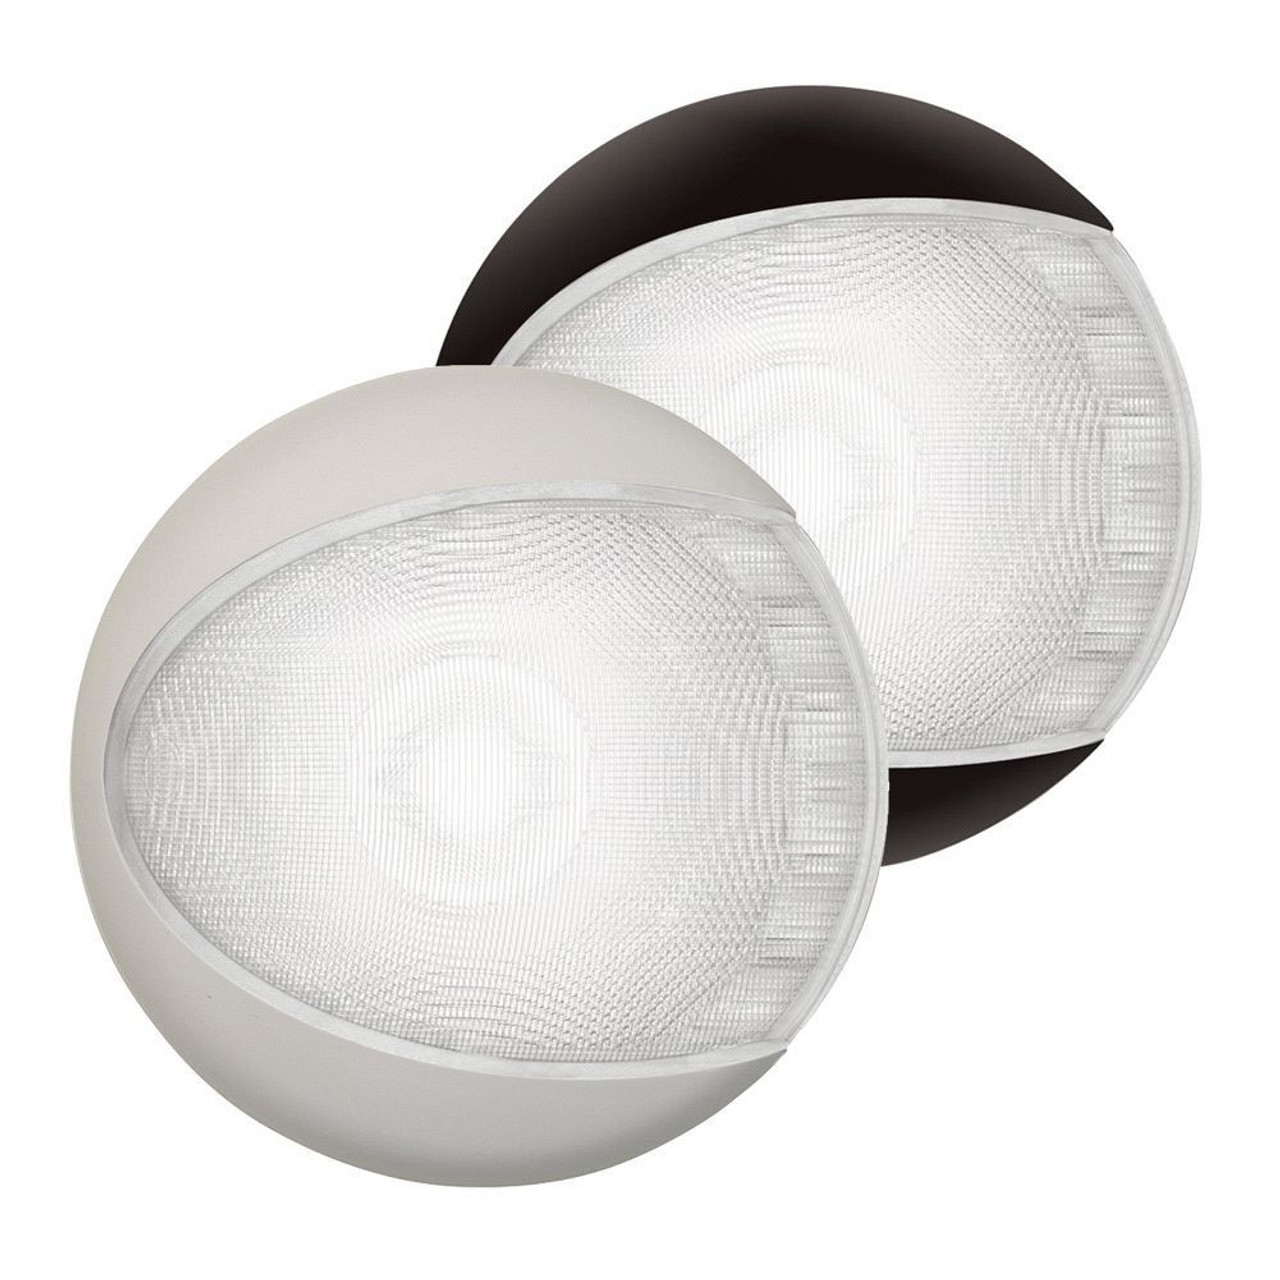 Hella Marine - White EuroLED Touch Lamps - EuroLED Touch - 5000K, IP6K6, 0.33A, 4W - Apollo Lighting